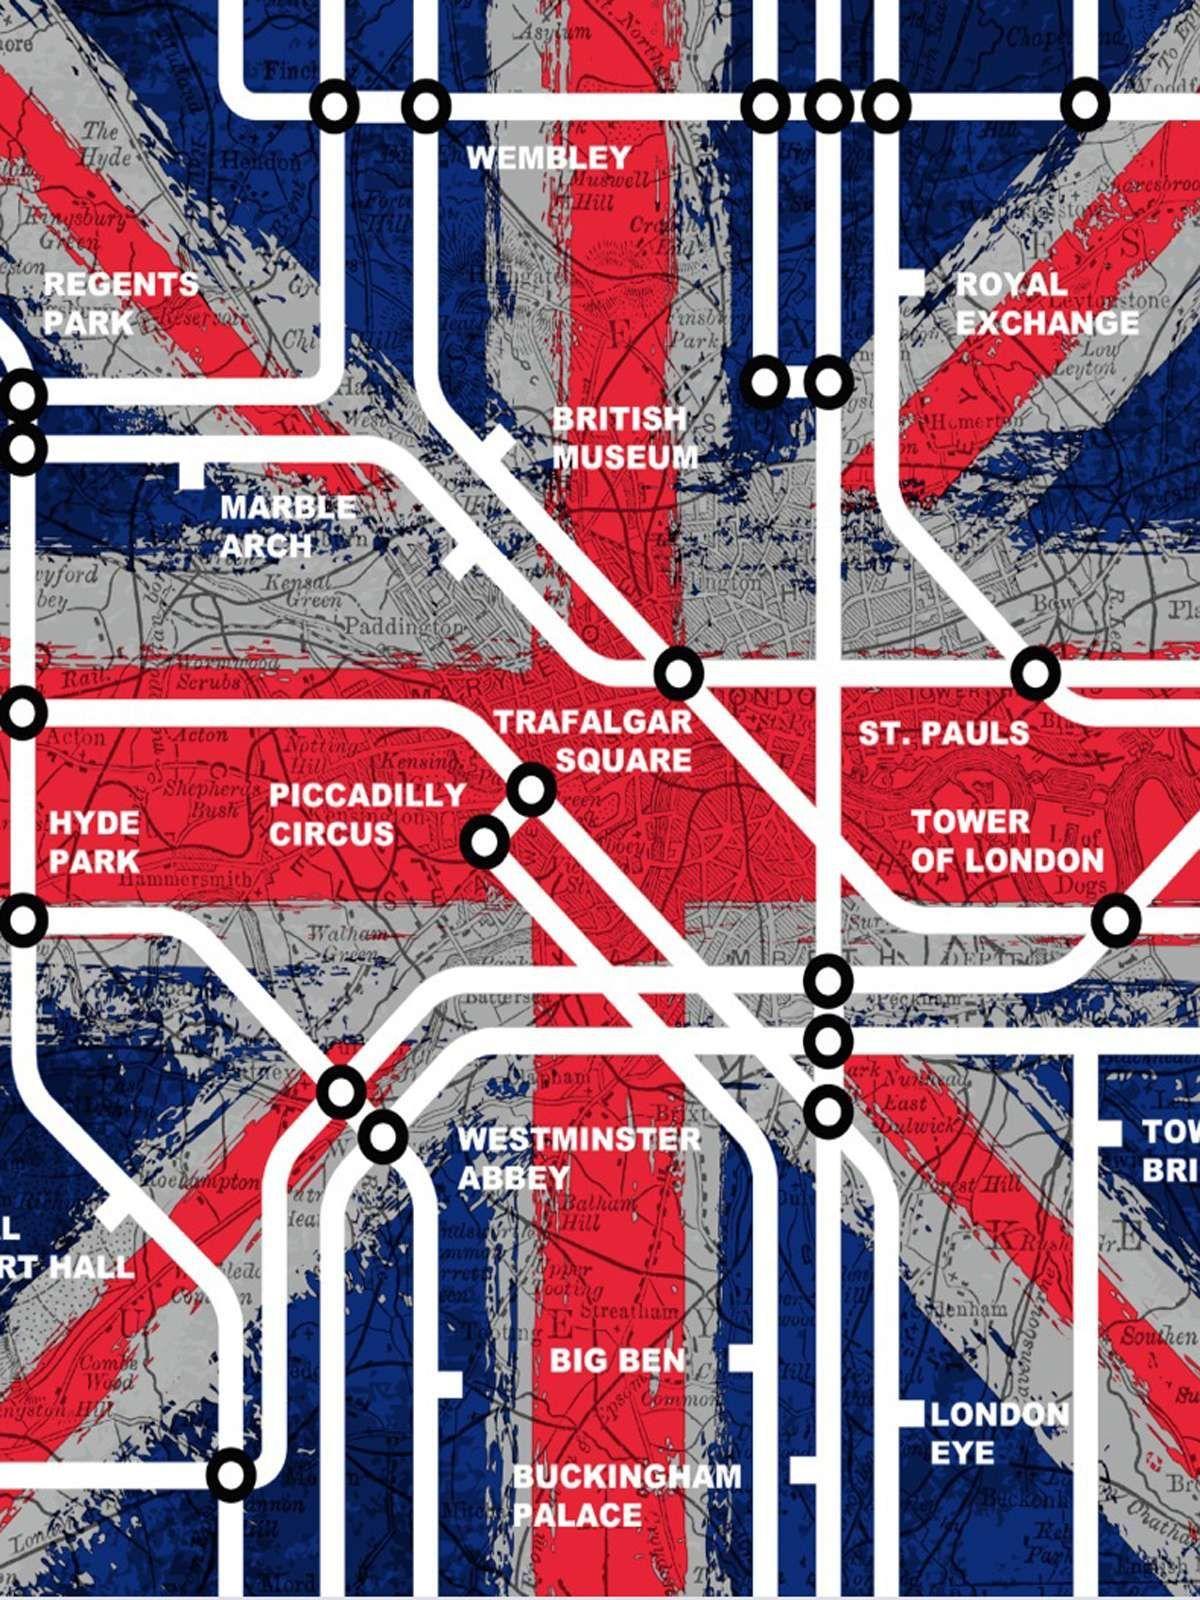 London Underground Wallpapers Top Free London Underground Backgrounds